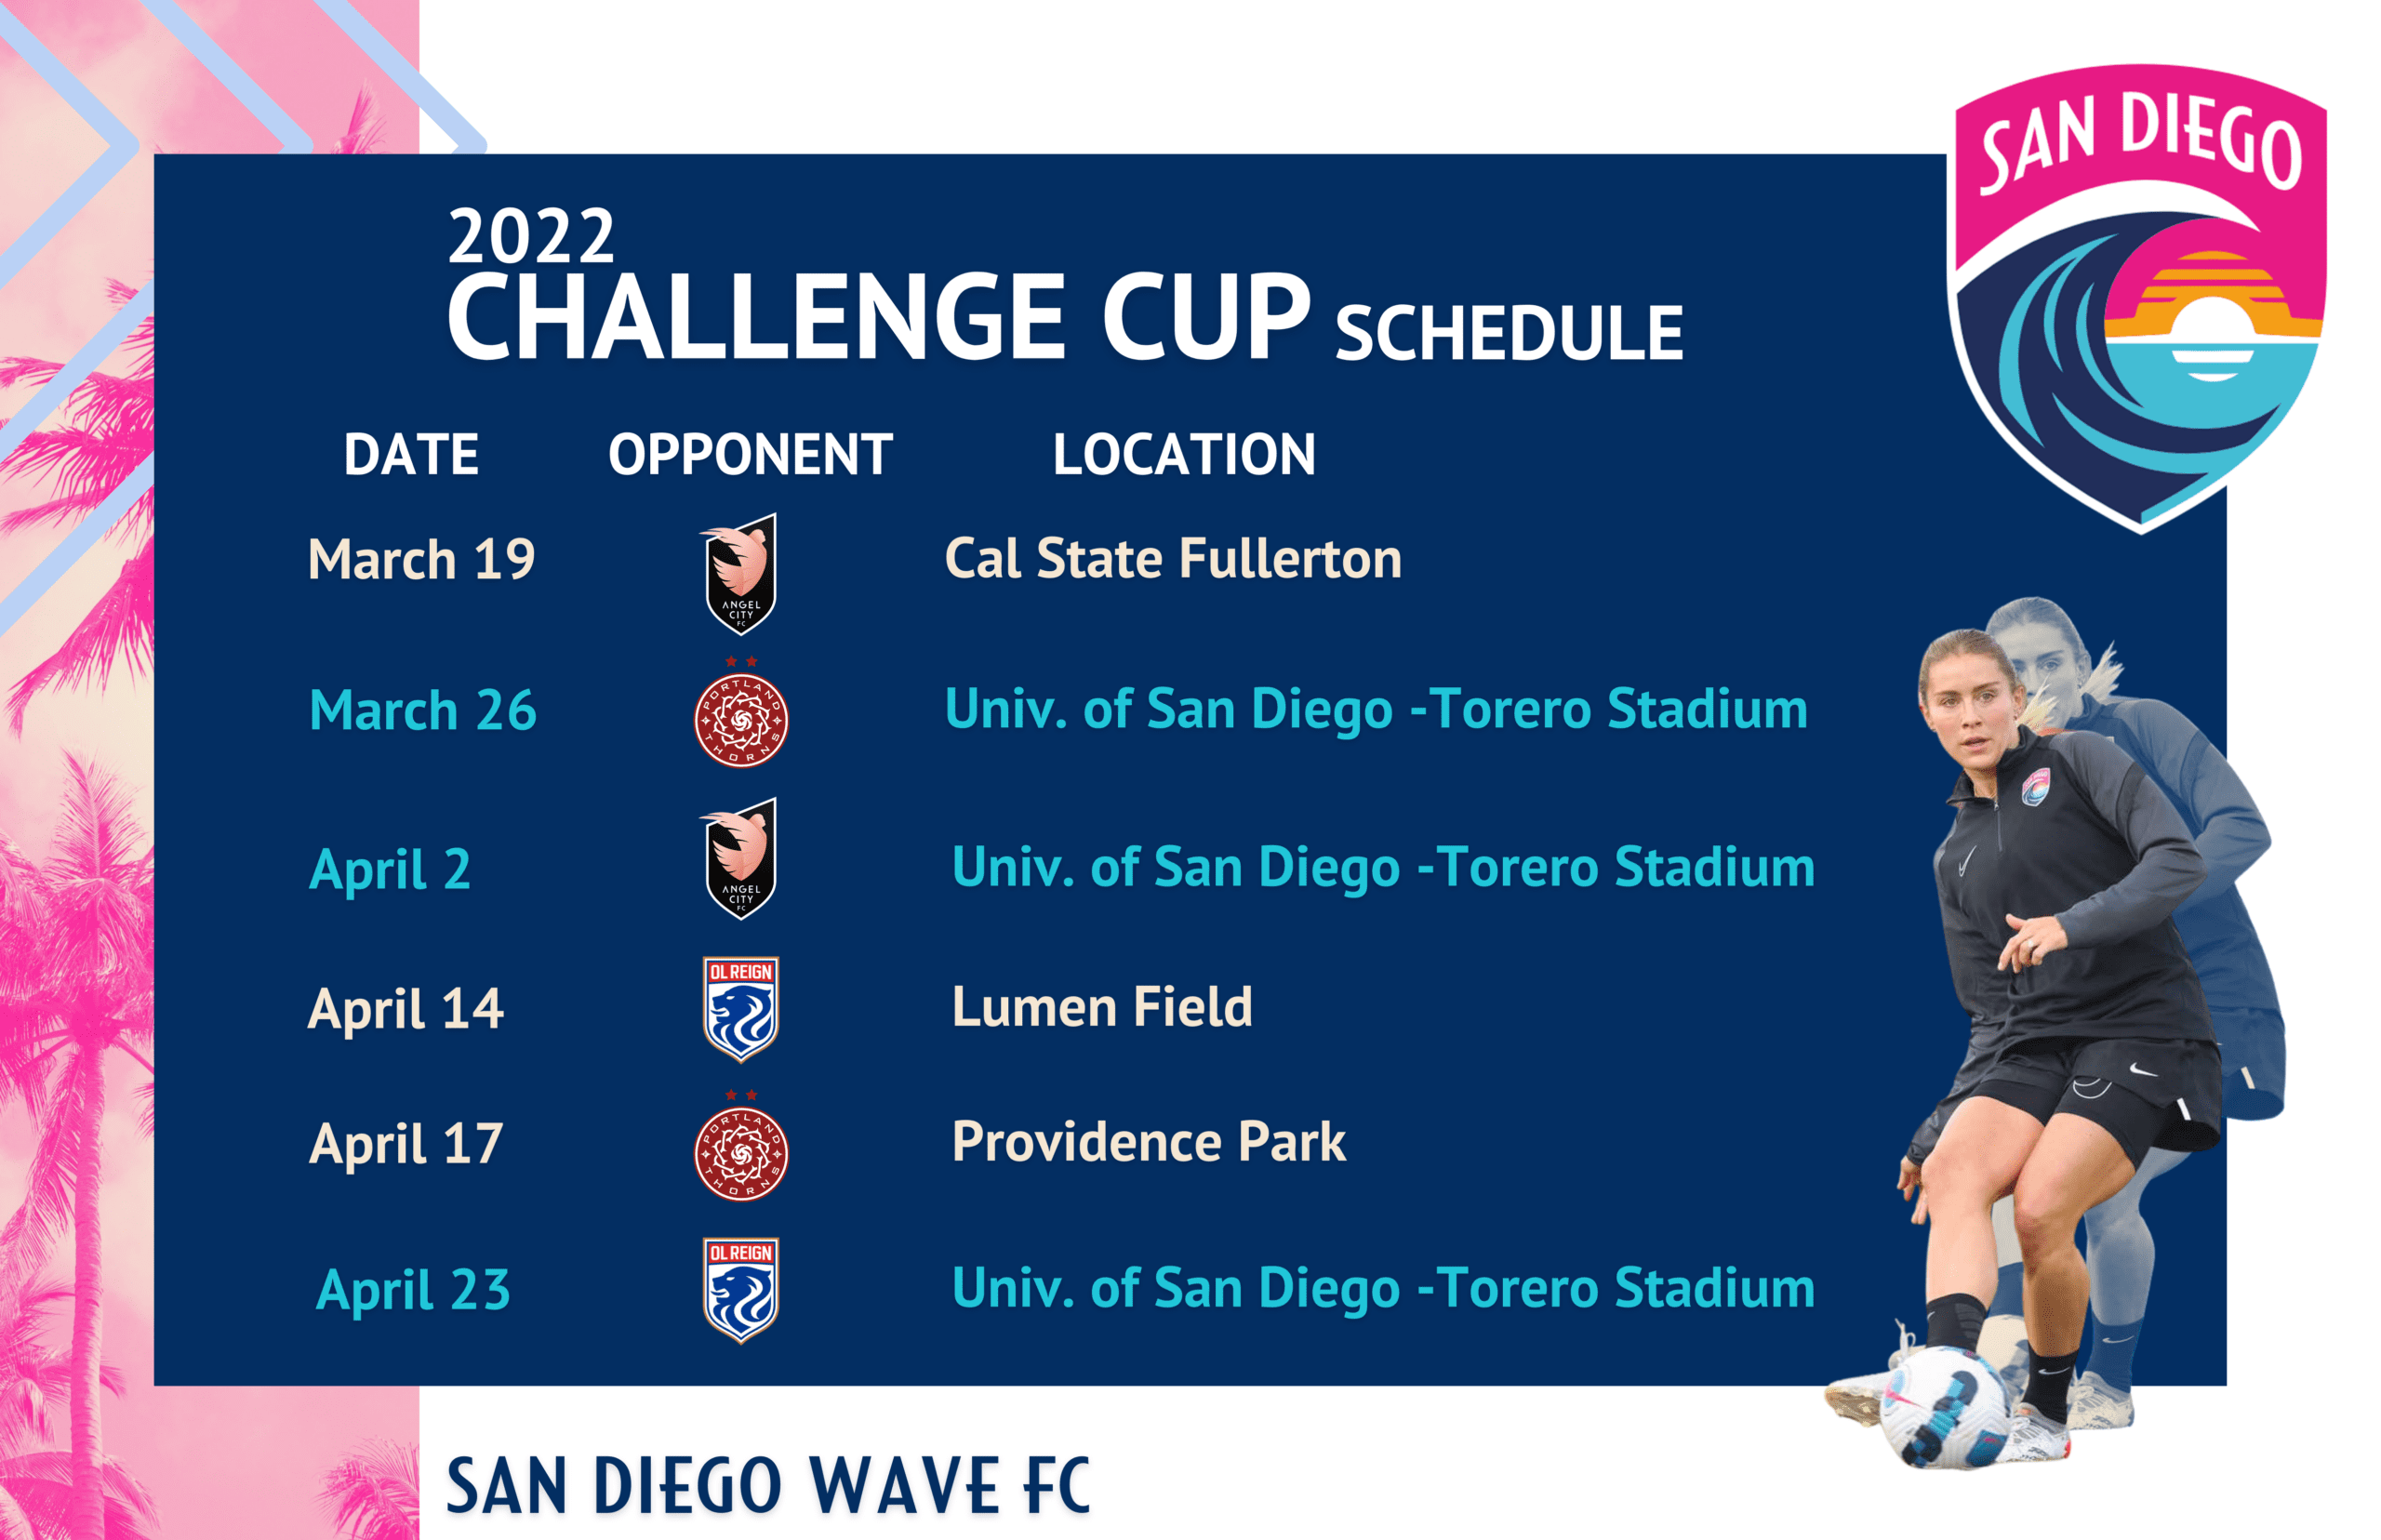 Cal State Fullerton Fall 2022 Schedule Wave Fc 2022 Challenge Cup Schedule Announced - San Diego Wave Fútbol Club